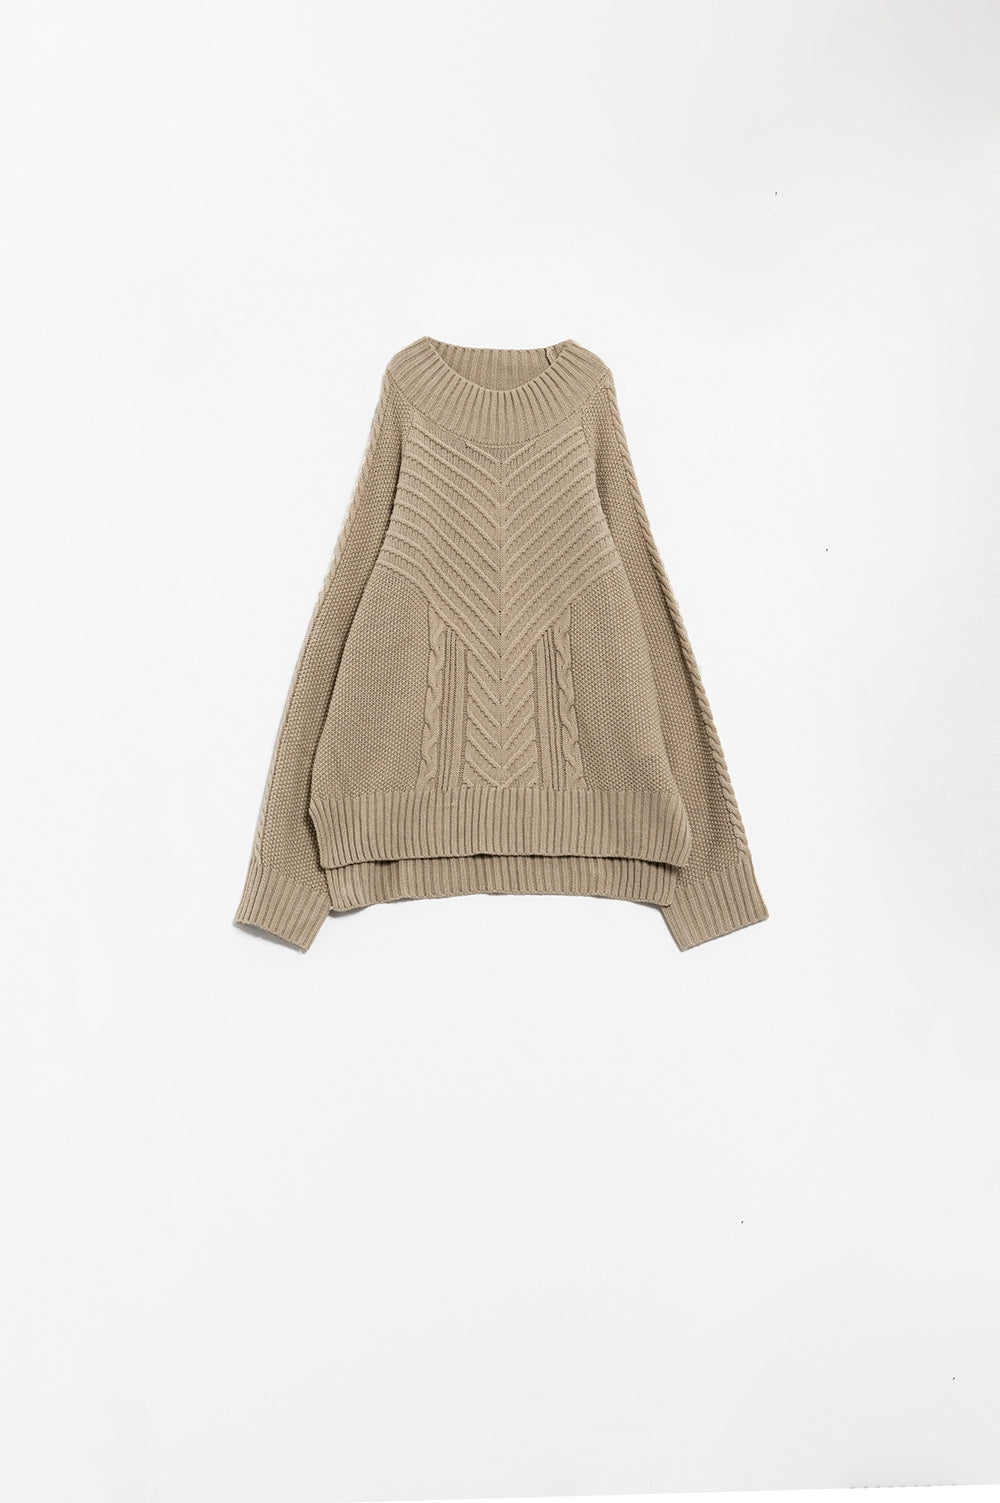 Q2 Beige chunky sweater with crochet design and crew neck